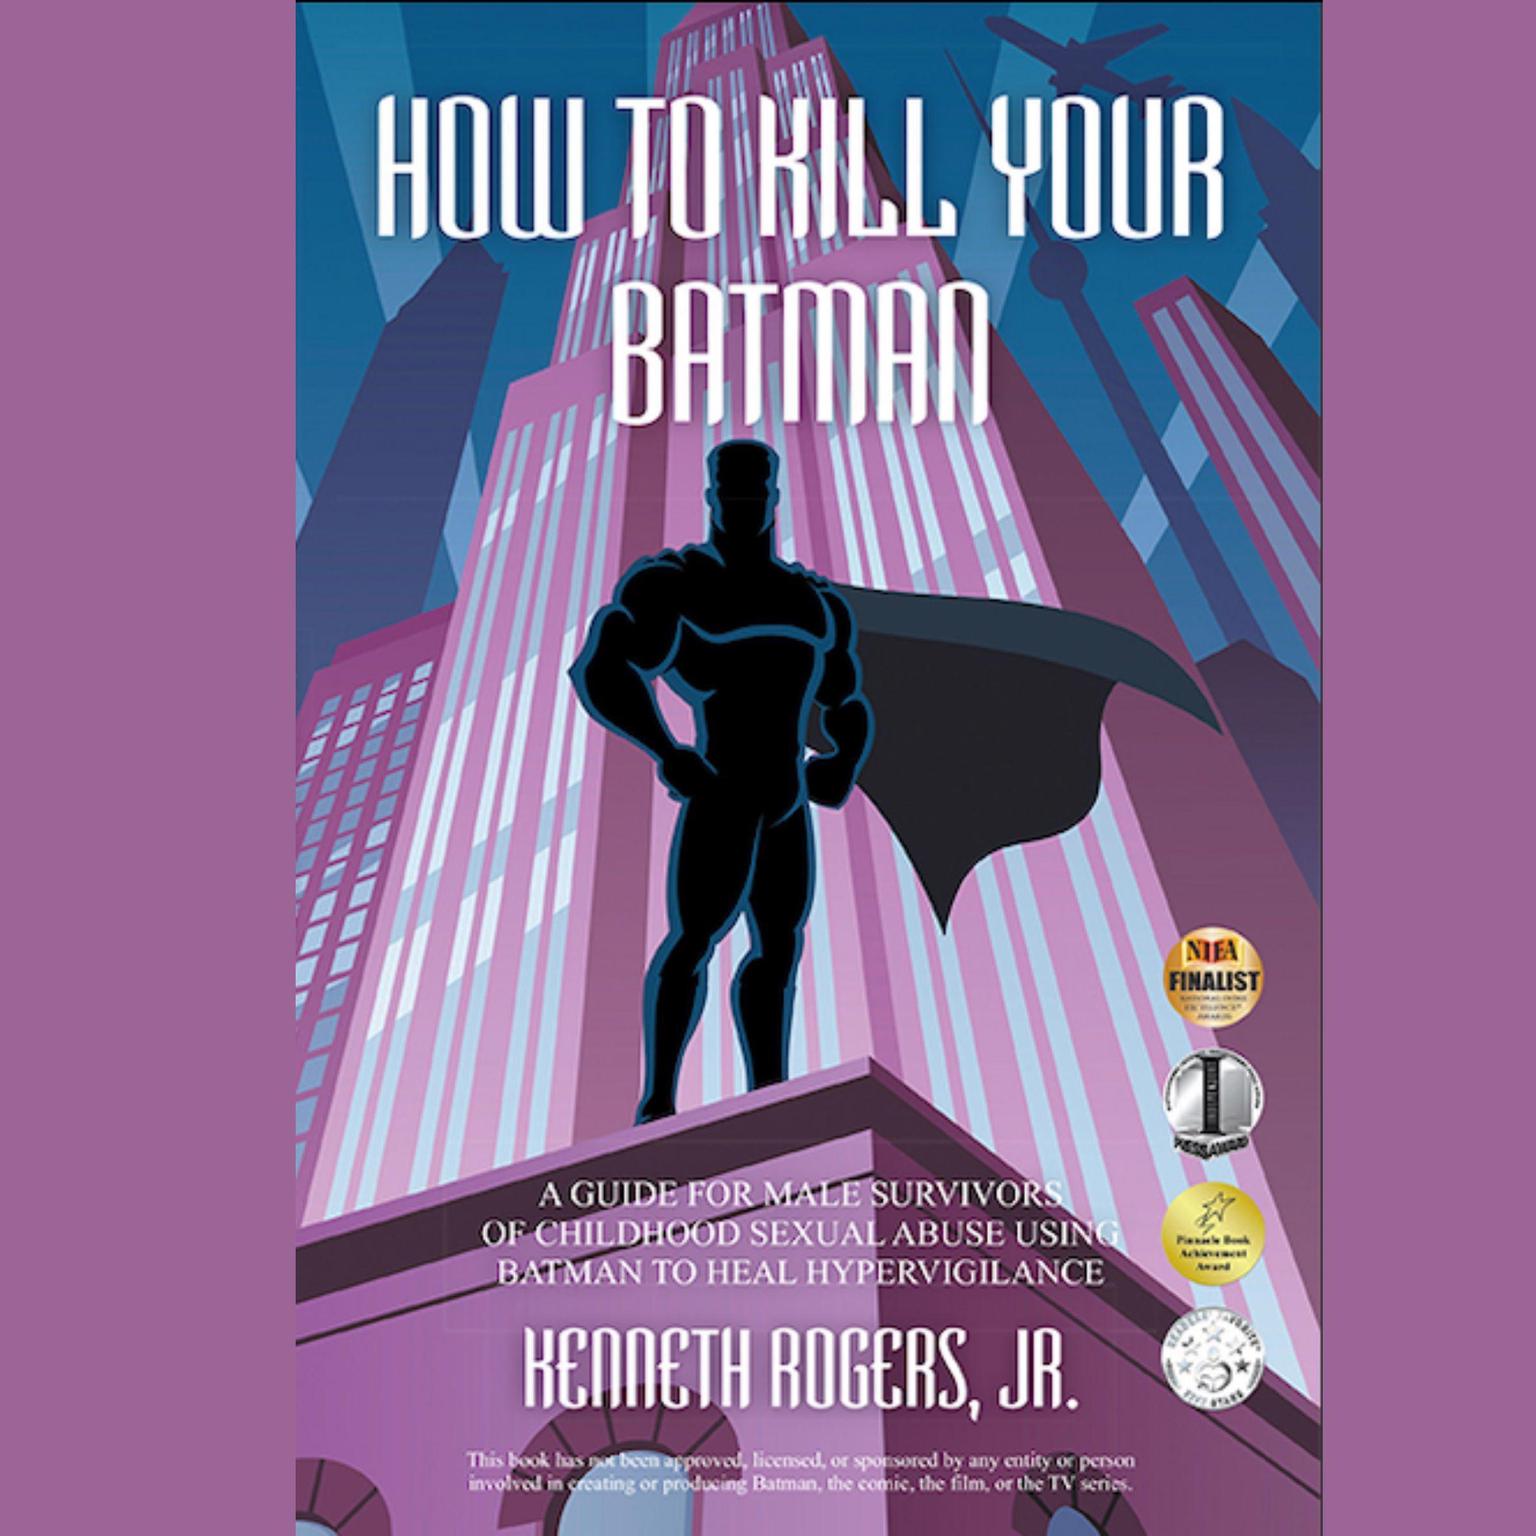 How To Kill Your Batman: A Guide for Male Survivors of Childhood Sexual Abuse Using Batman to Heal Hypervigilance (Abridged): A Guide for Male Survivors of Childhood Sexual Abuse Using Batman to Heal Hypervigilance Audiobook, by Kenneth Rogers